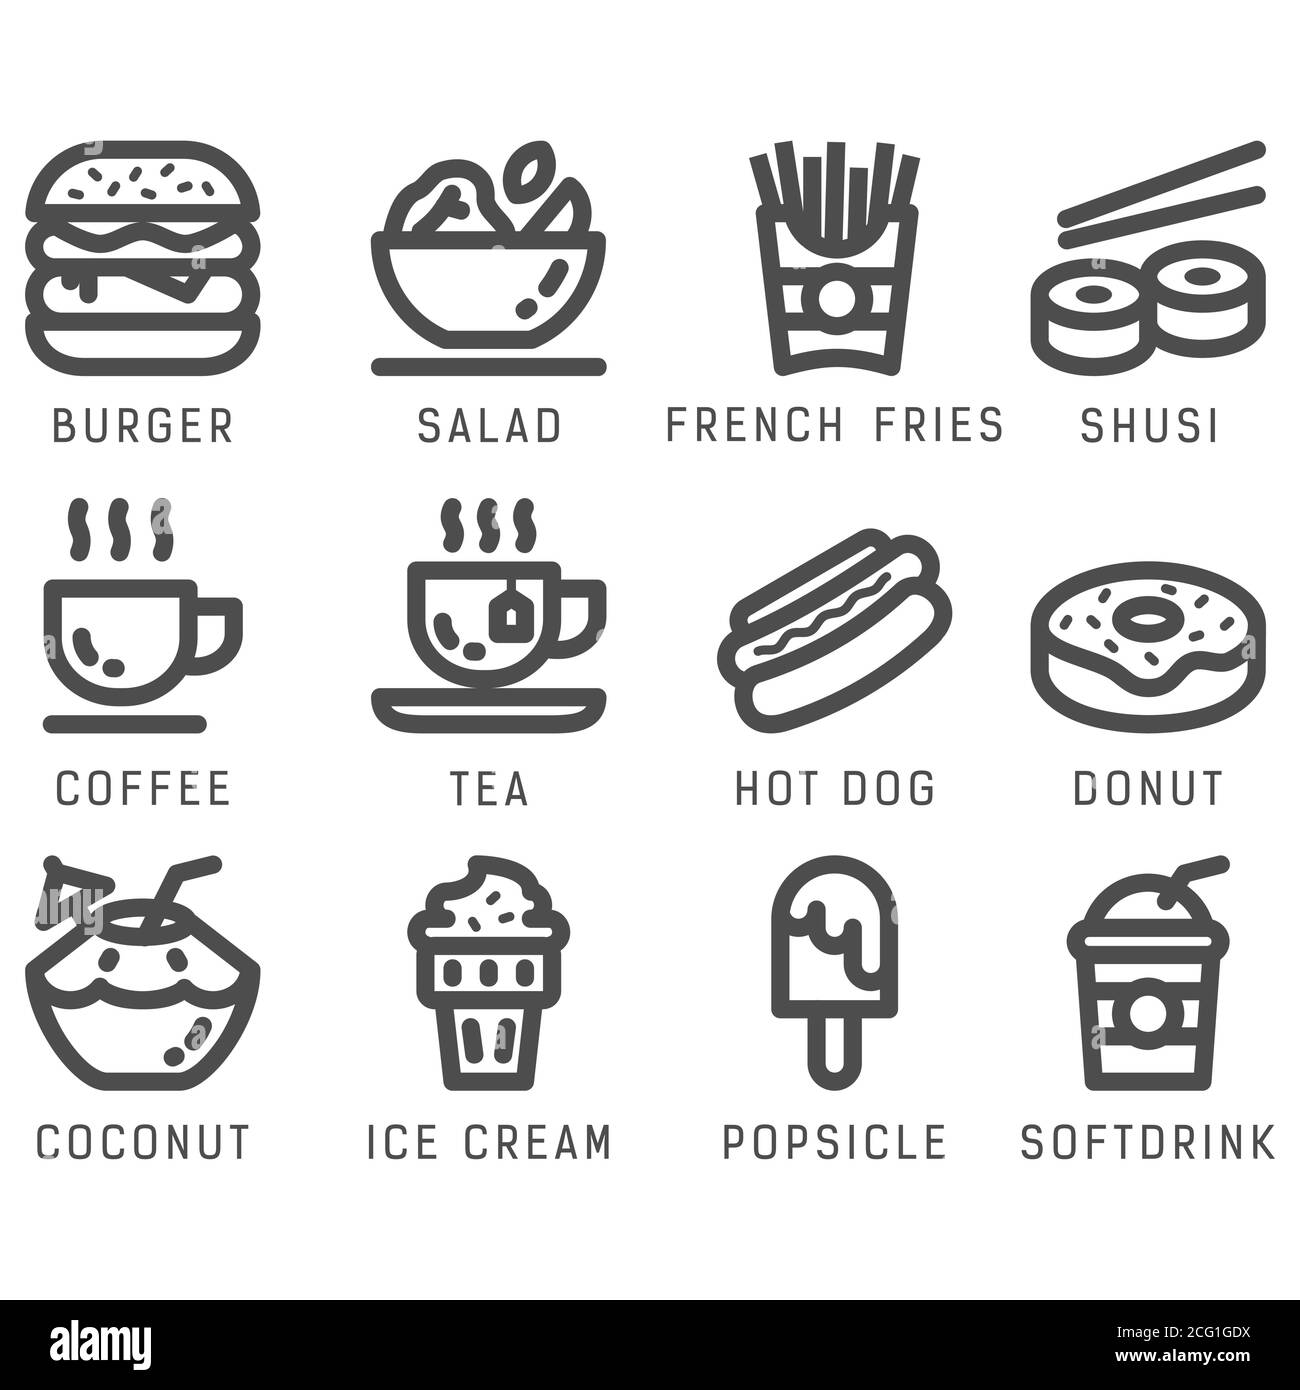 Food and drink icon set with line style in isolated white background. Food and drink vector icon set, burger, coconut, salad, hotdog, shusi, softdrink Stock Vector